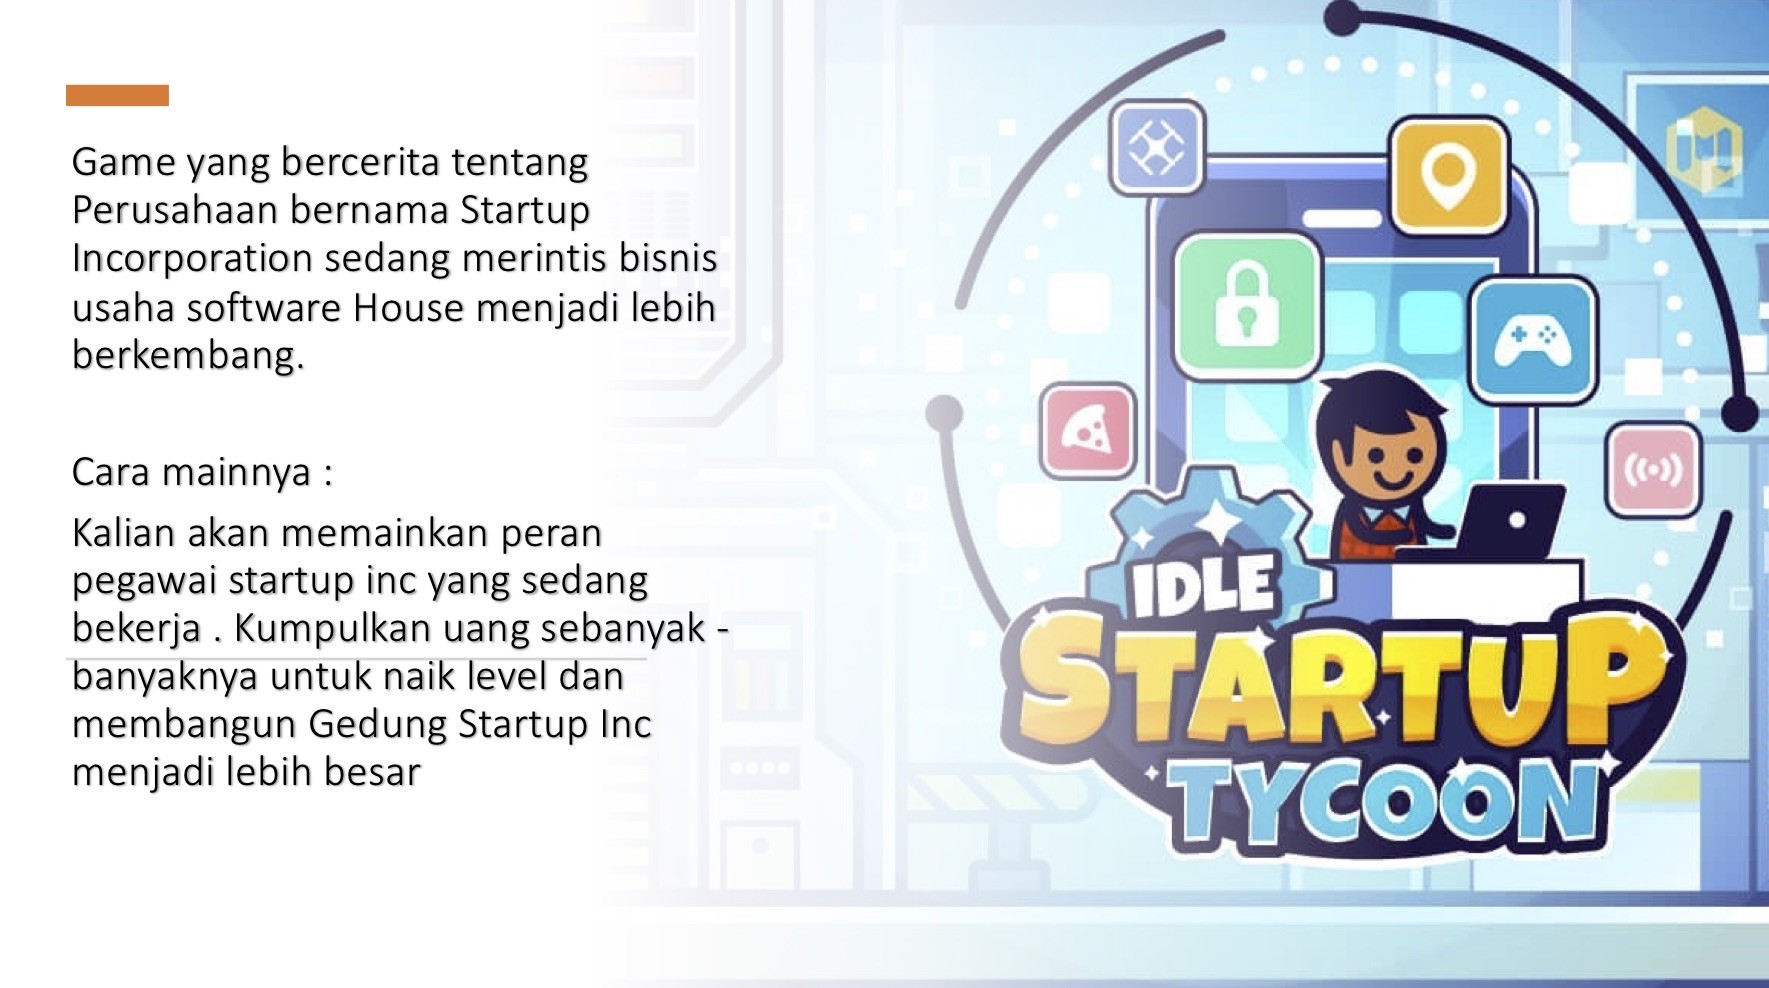 https://www.crazygames.com/game/idle-startup-tycoon